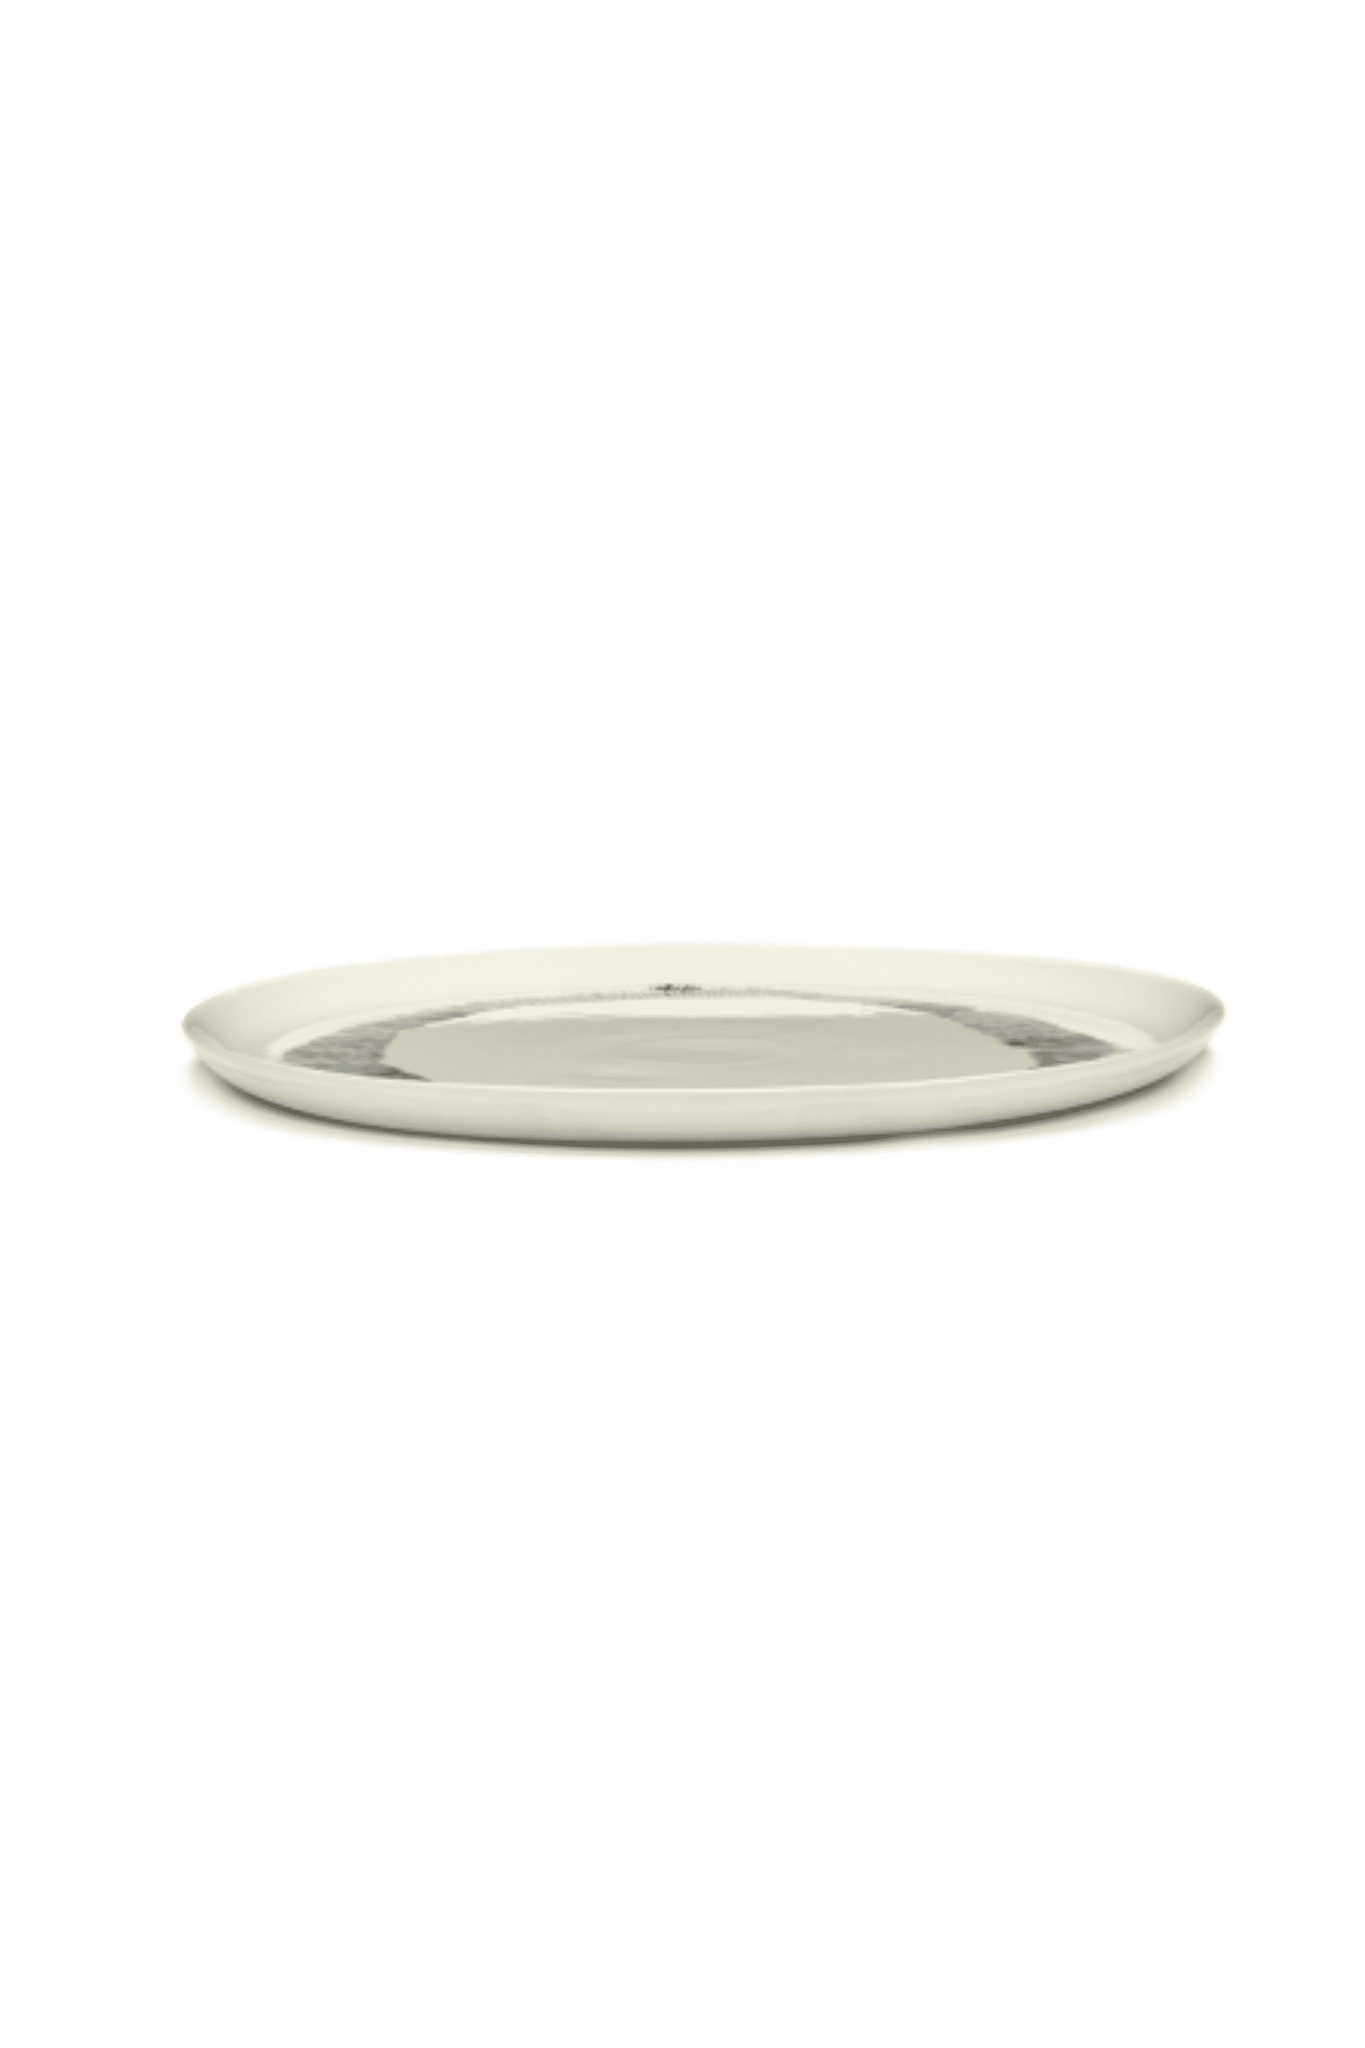 Serving Plate, White Swirl with Blue Stripes Ottolenghi Serax, side view